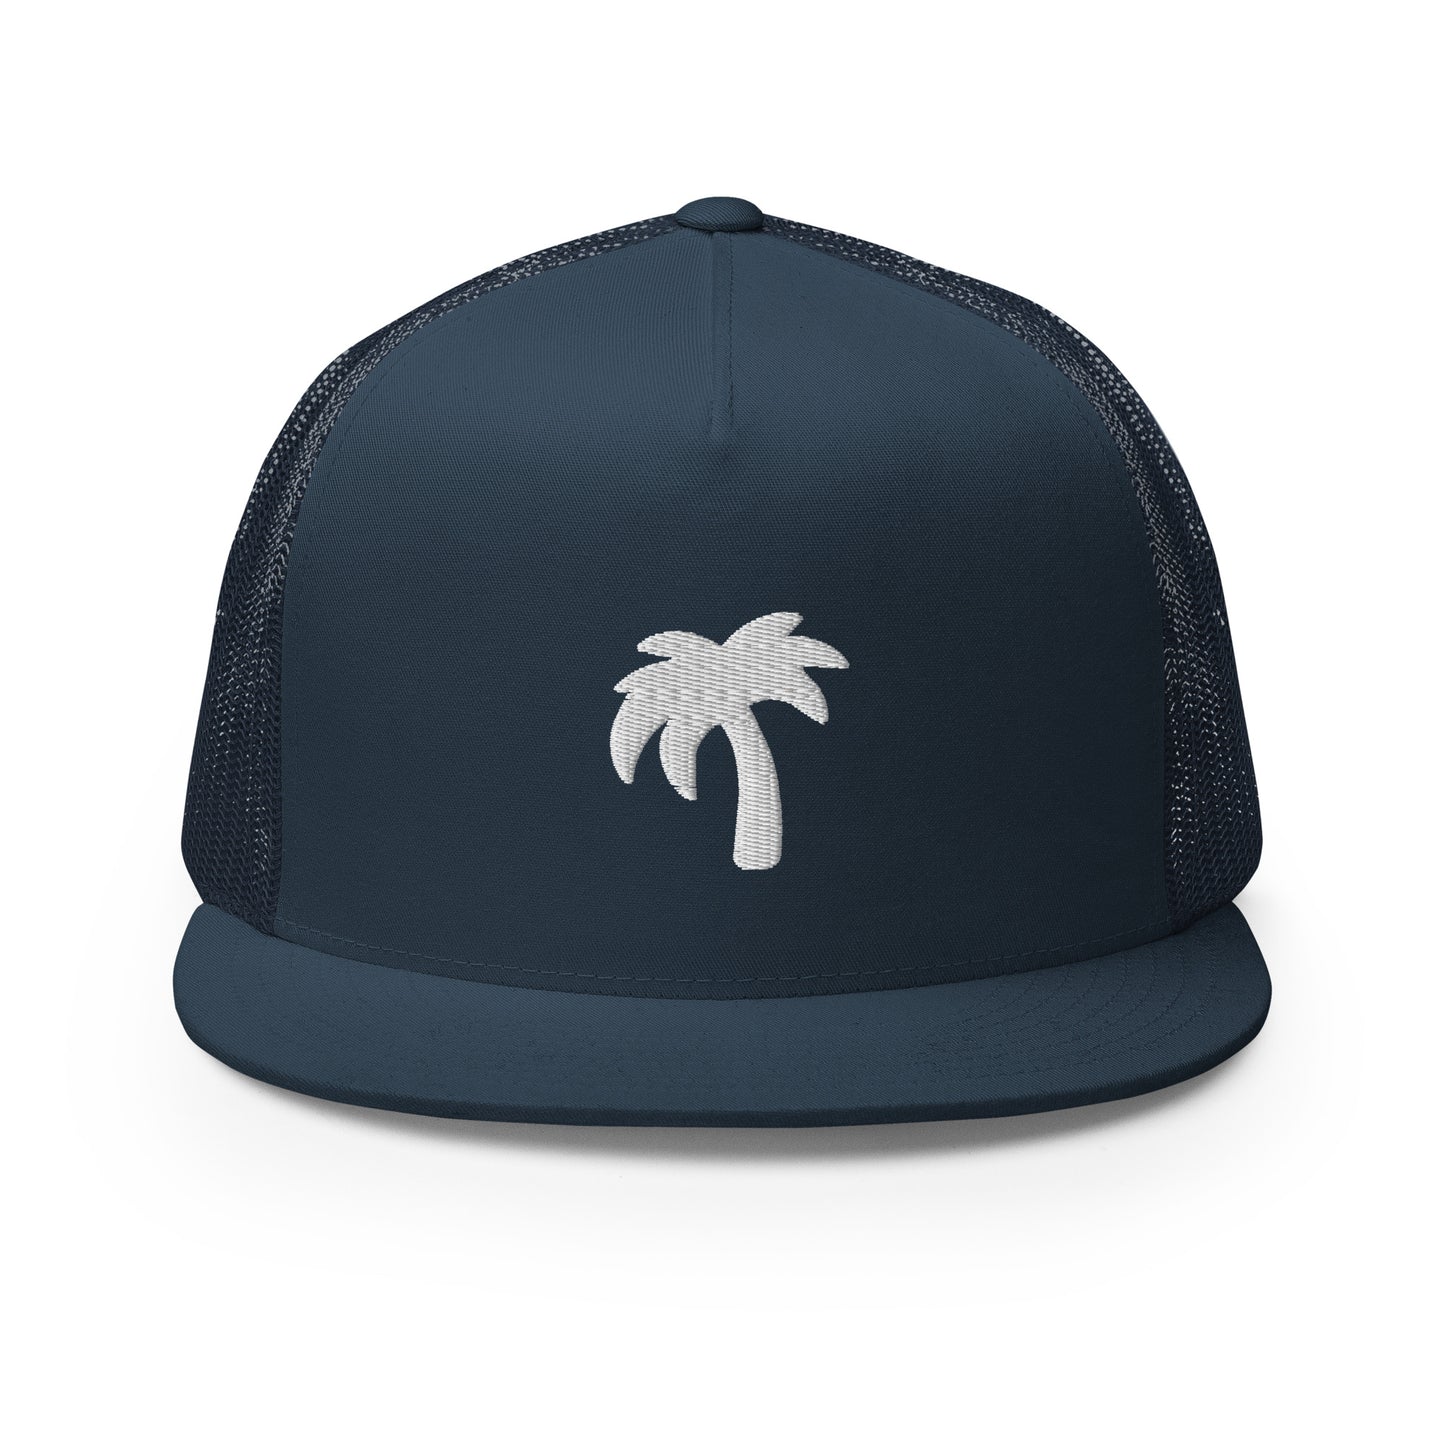 Navy Blue Trucker with White Palm